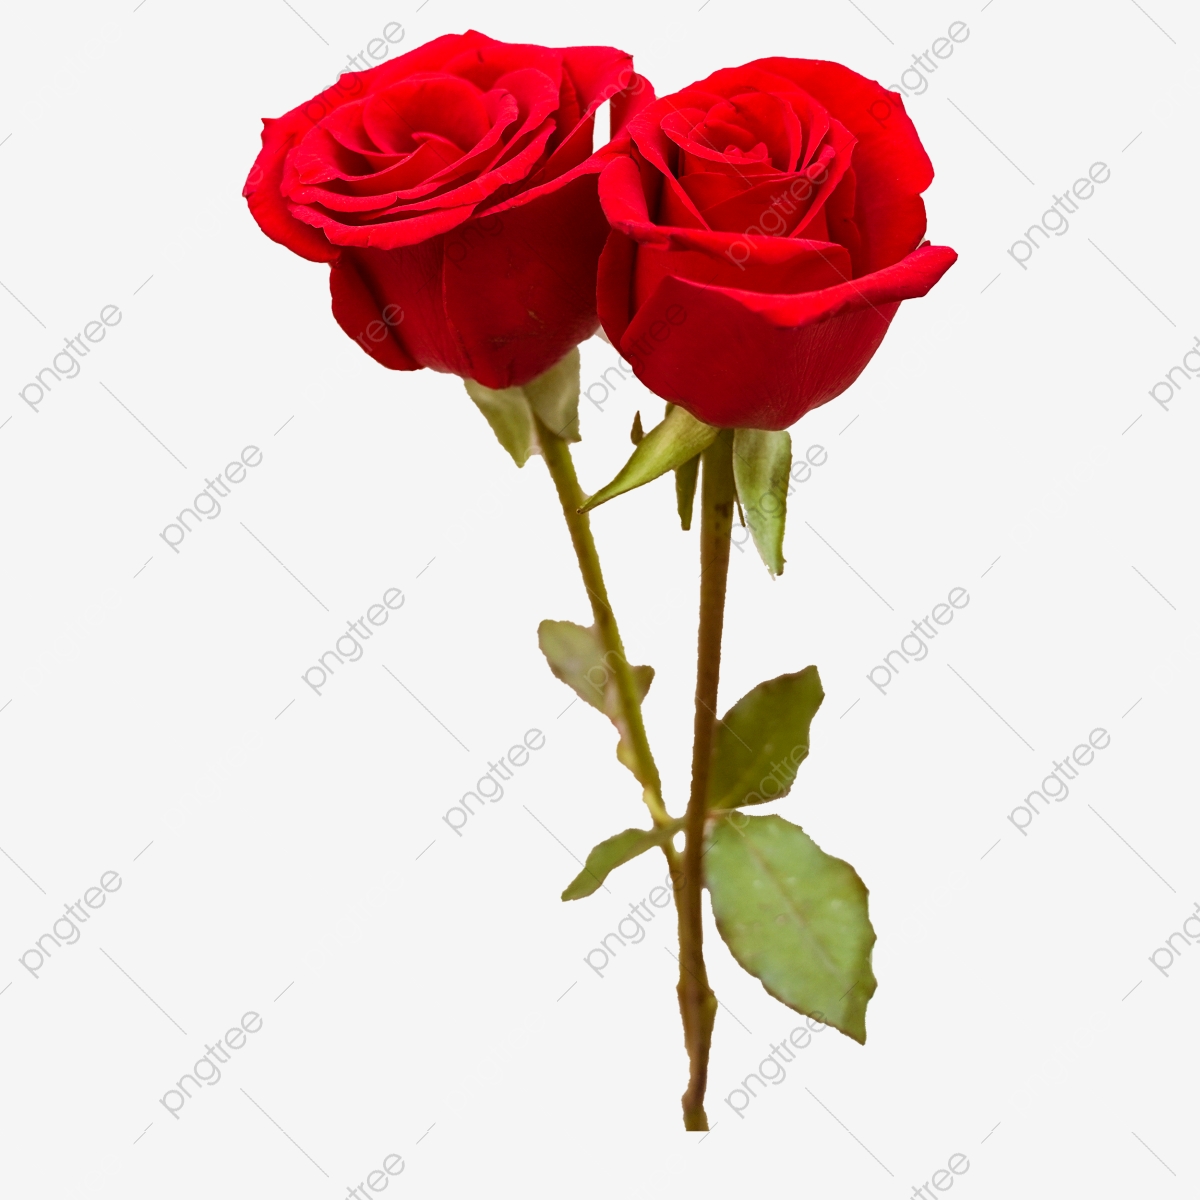 Two Blooming Red Roses Flower Photography Picture